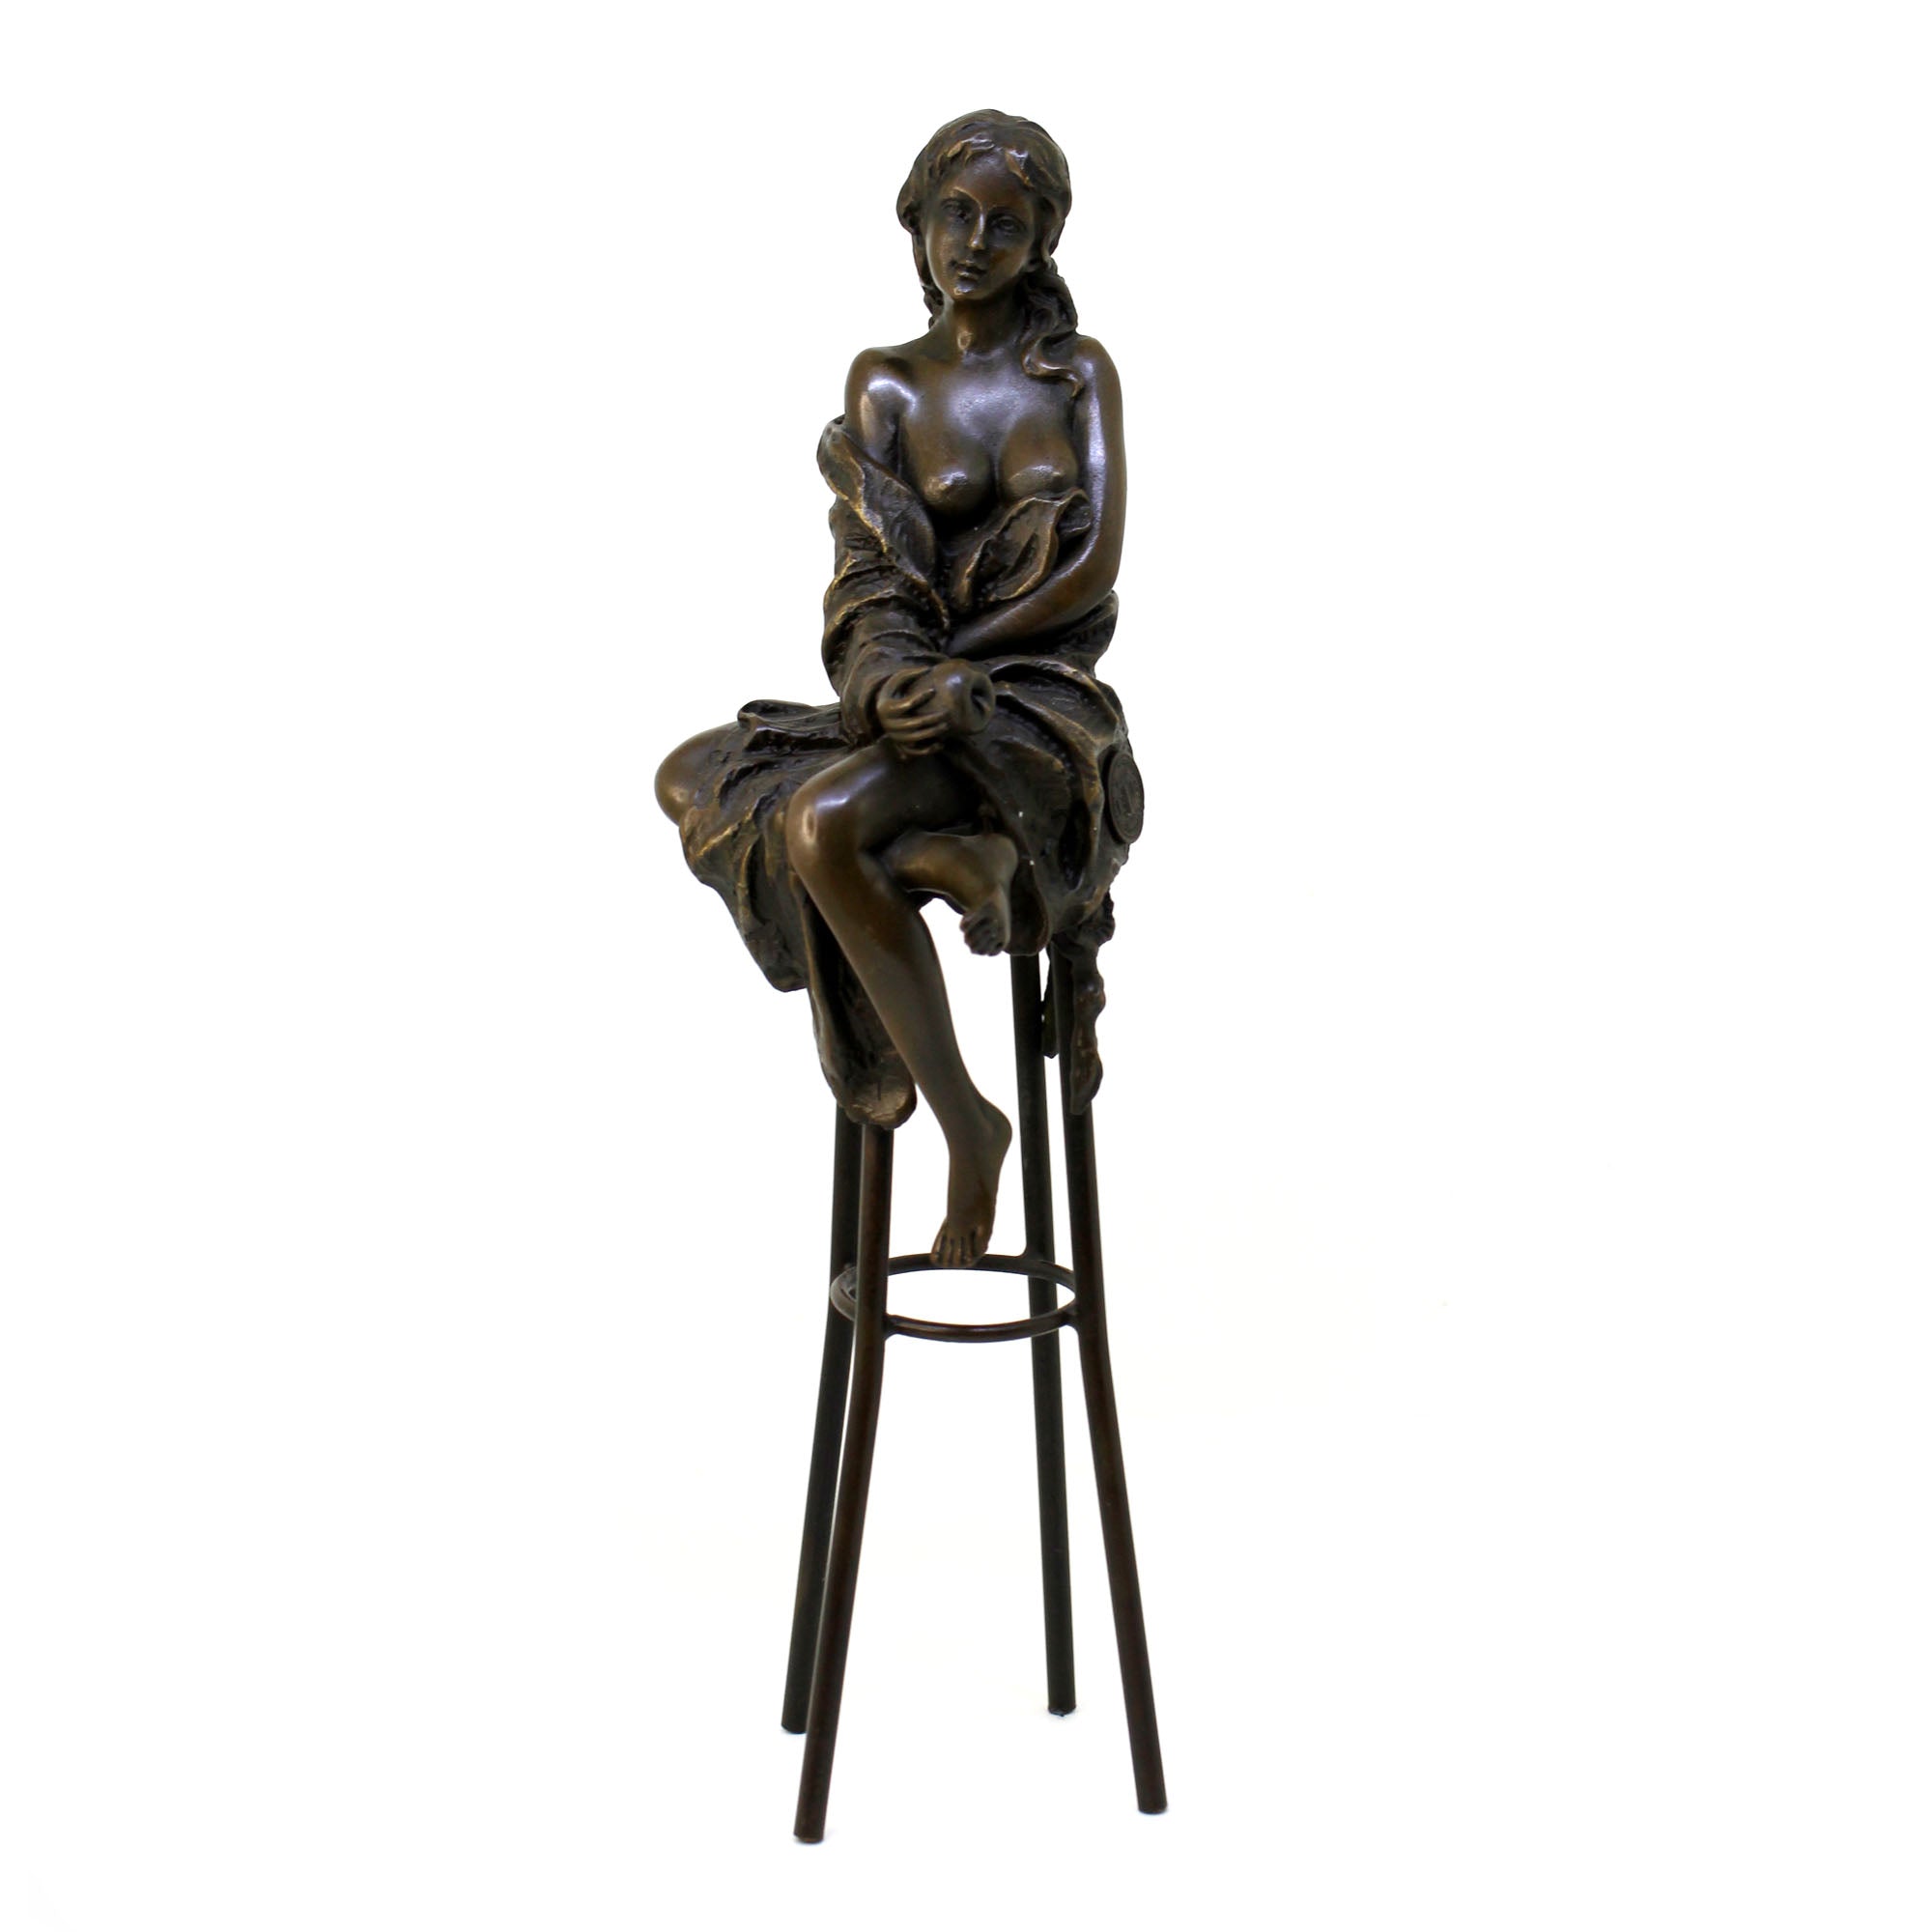 Woman on a Chair - Apple